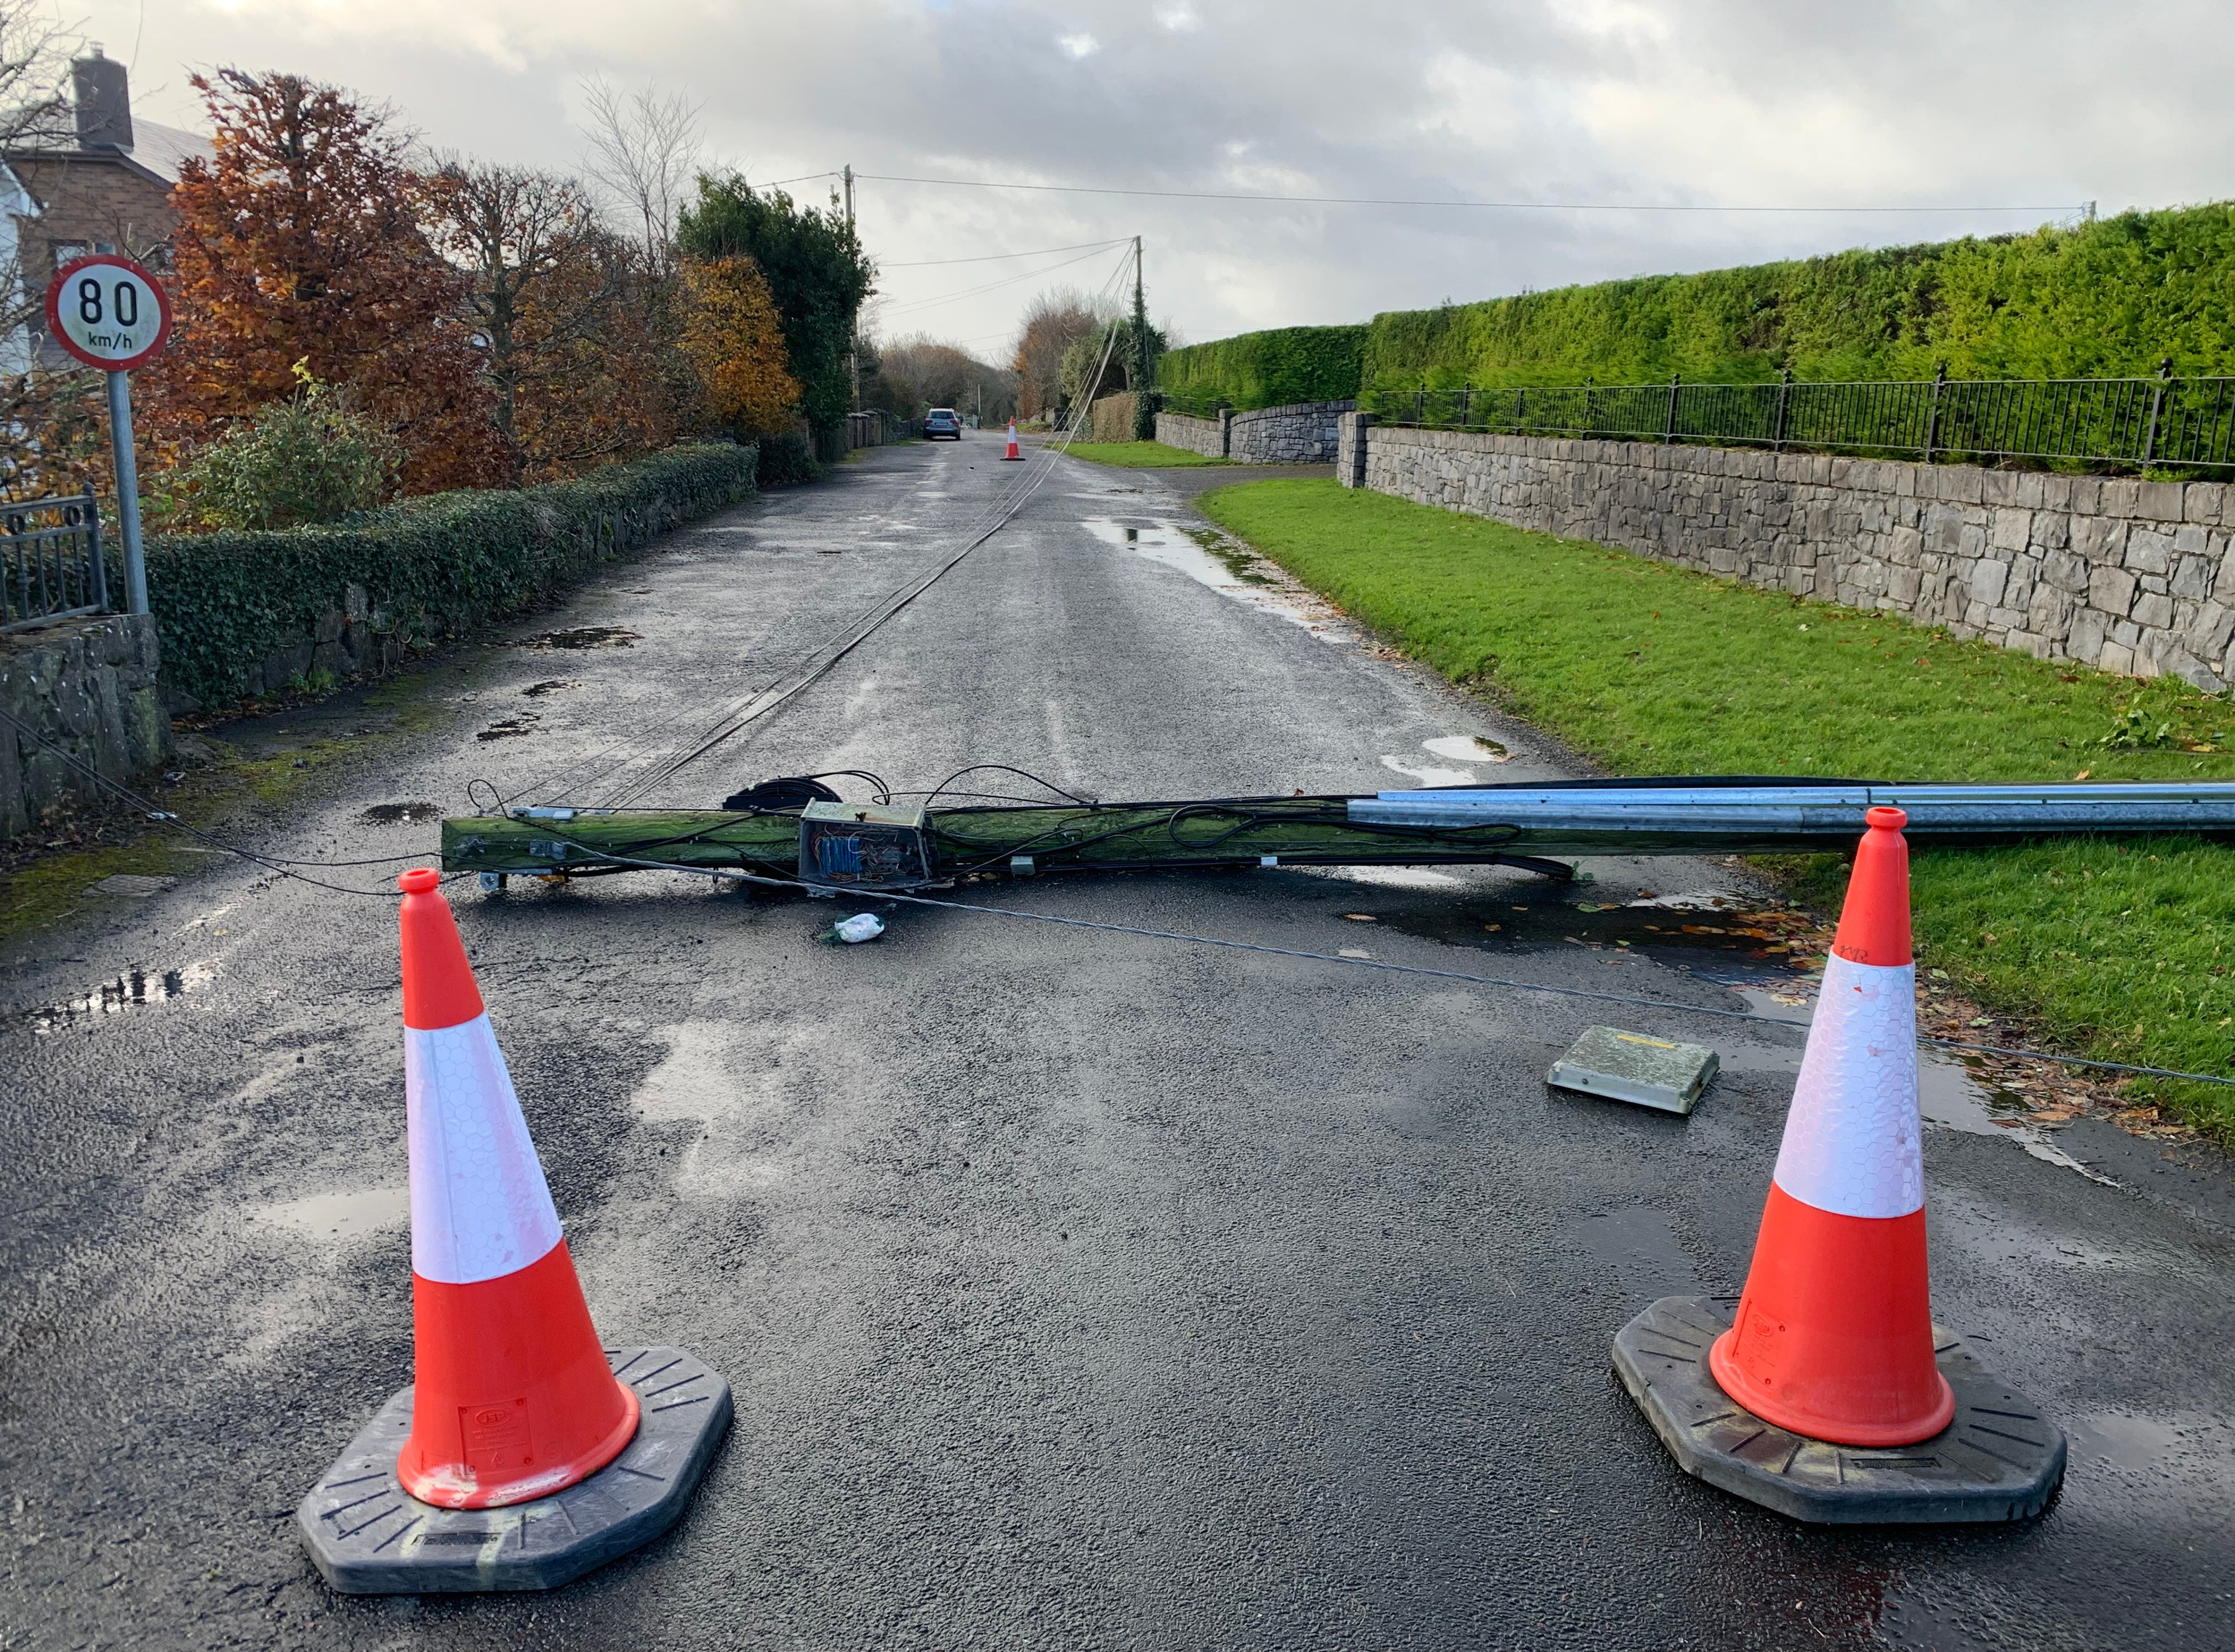 A Telegraph pole down on the Maree Rd, Oranmore, Co Galway after Storm Debi swept across the area